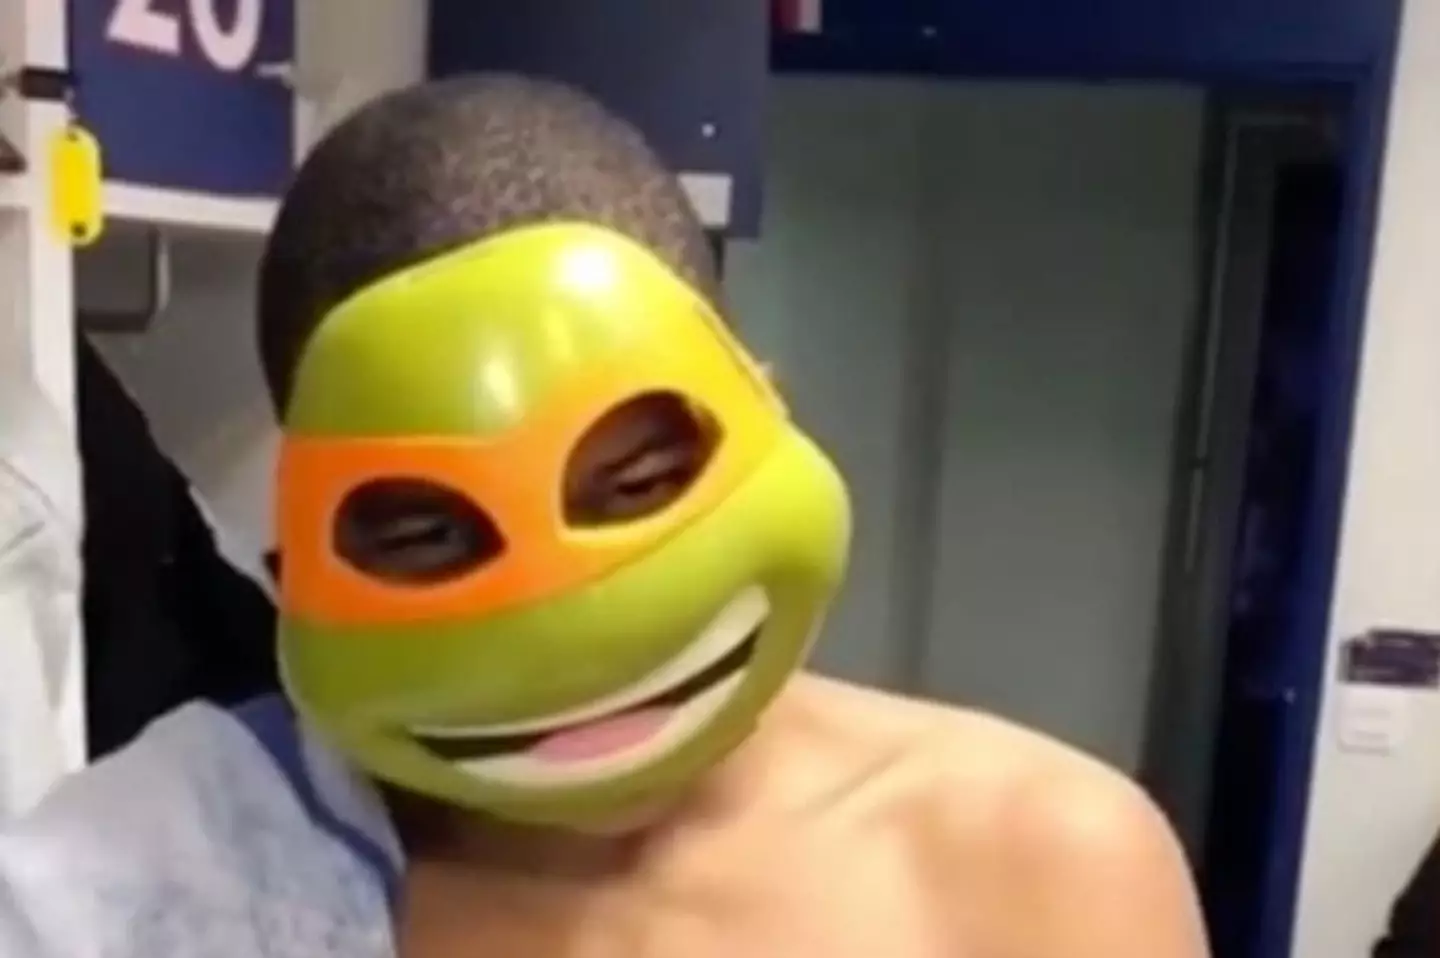 Mbappe with his mask. Image: Instagram